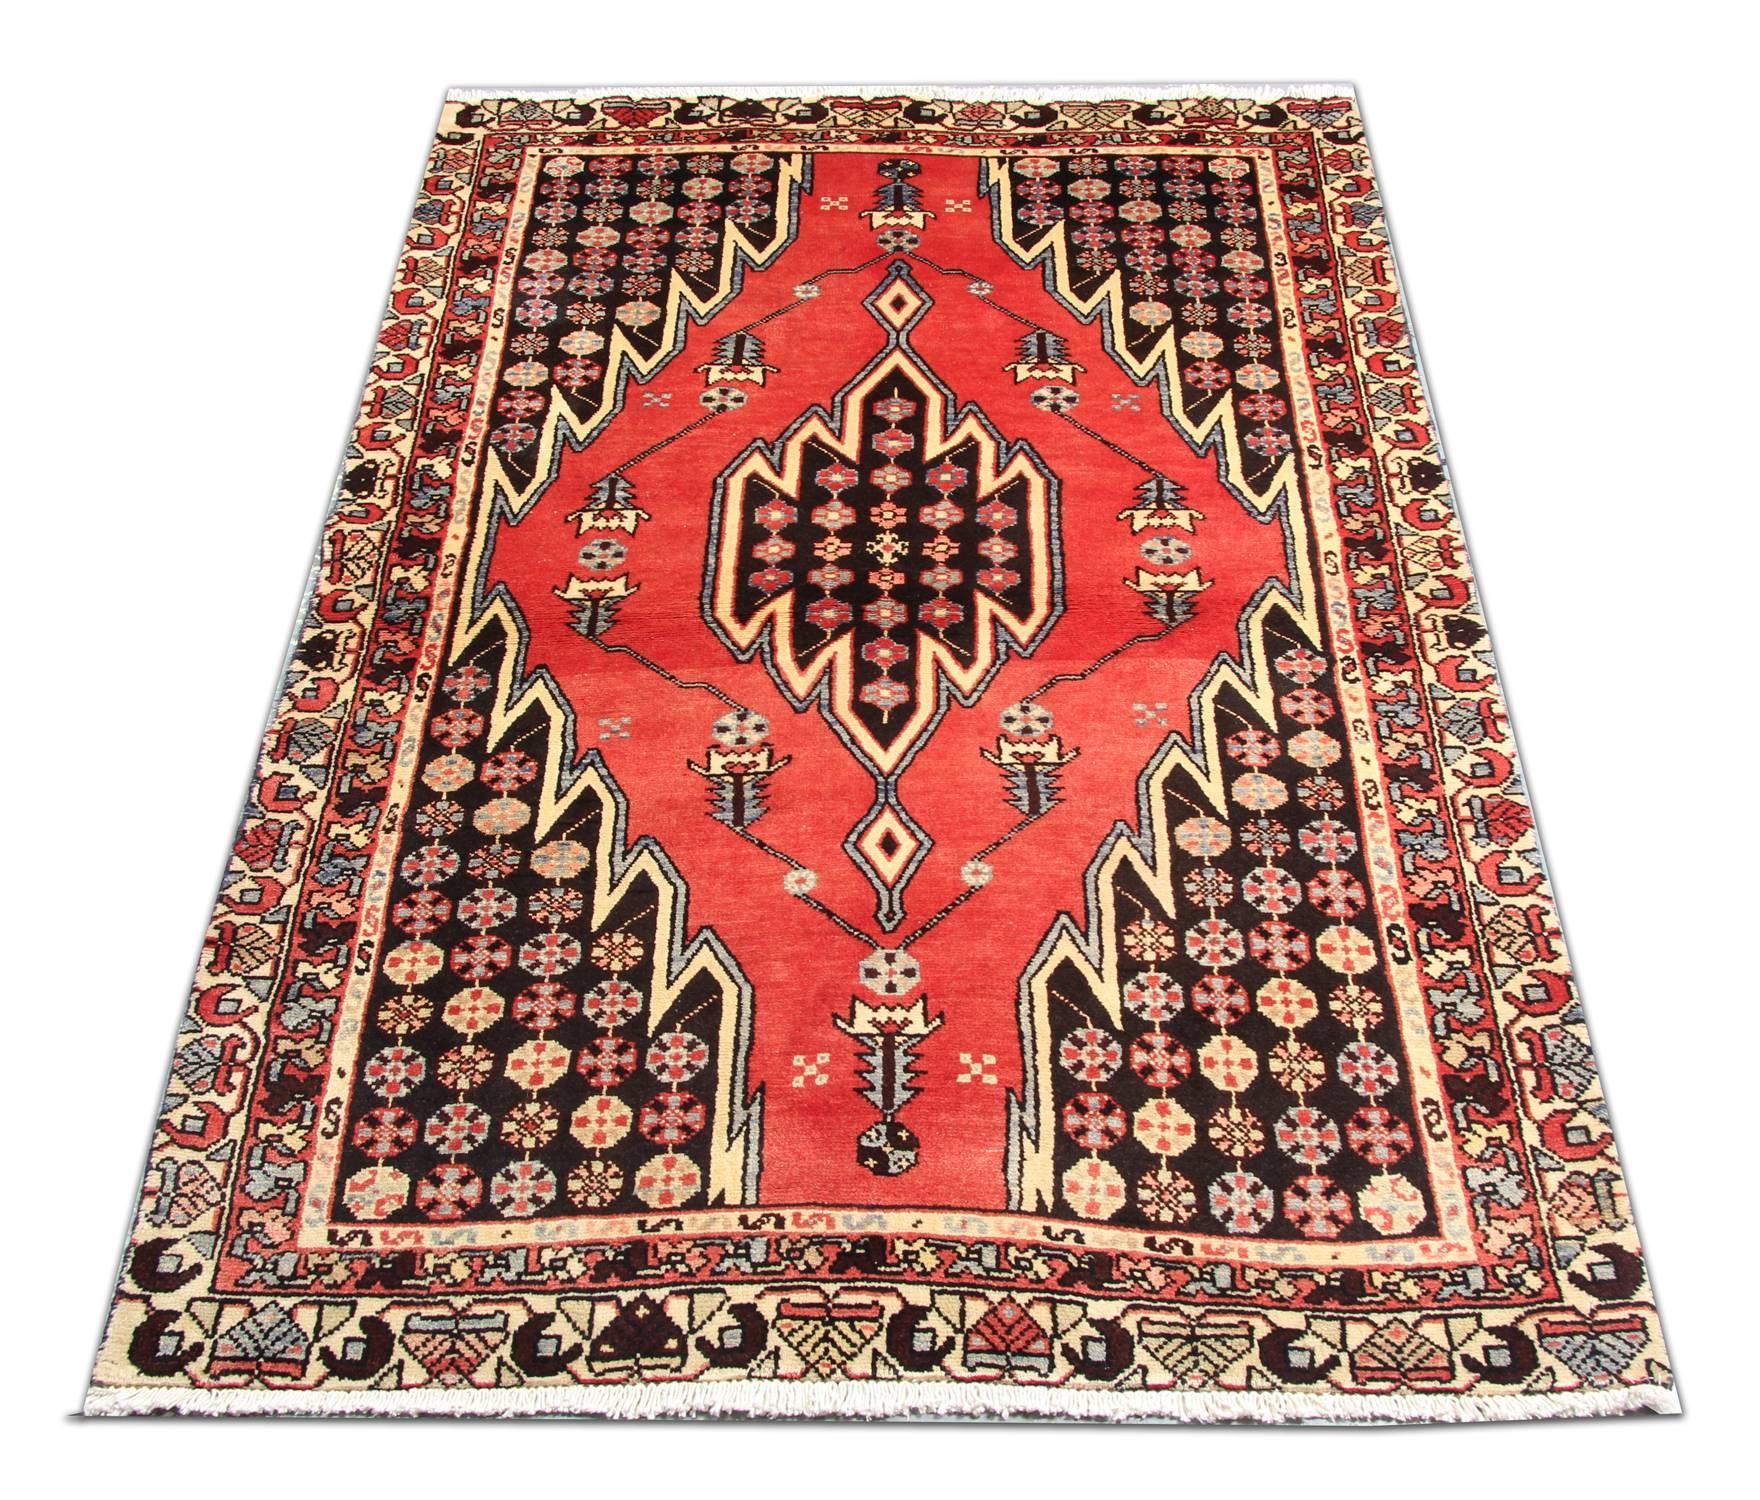 Upgrade your floors with this beautiful handwoven wool rug. Featuring a fantastic central medallion design woven on a red field and a highly-detailed surround design and border. This rug would make a perfect addition to any home. Suitable for both